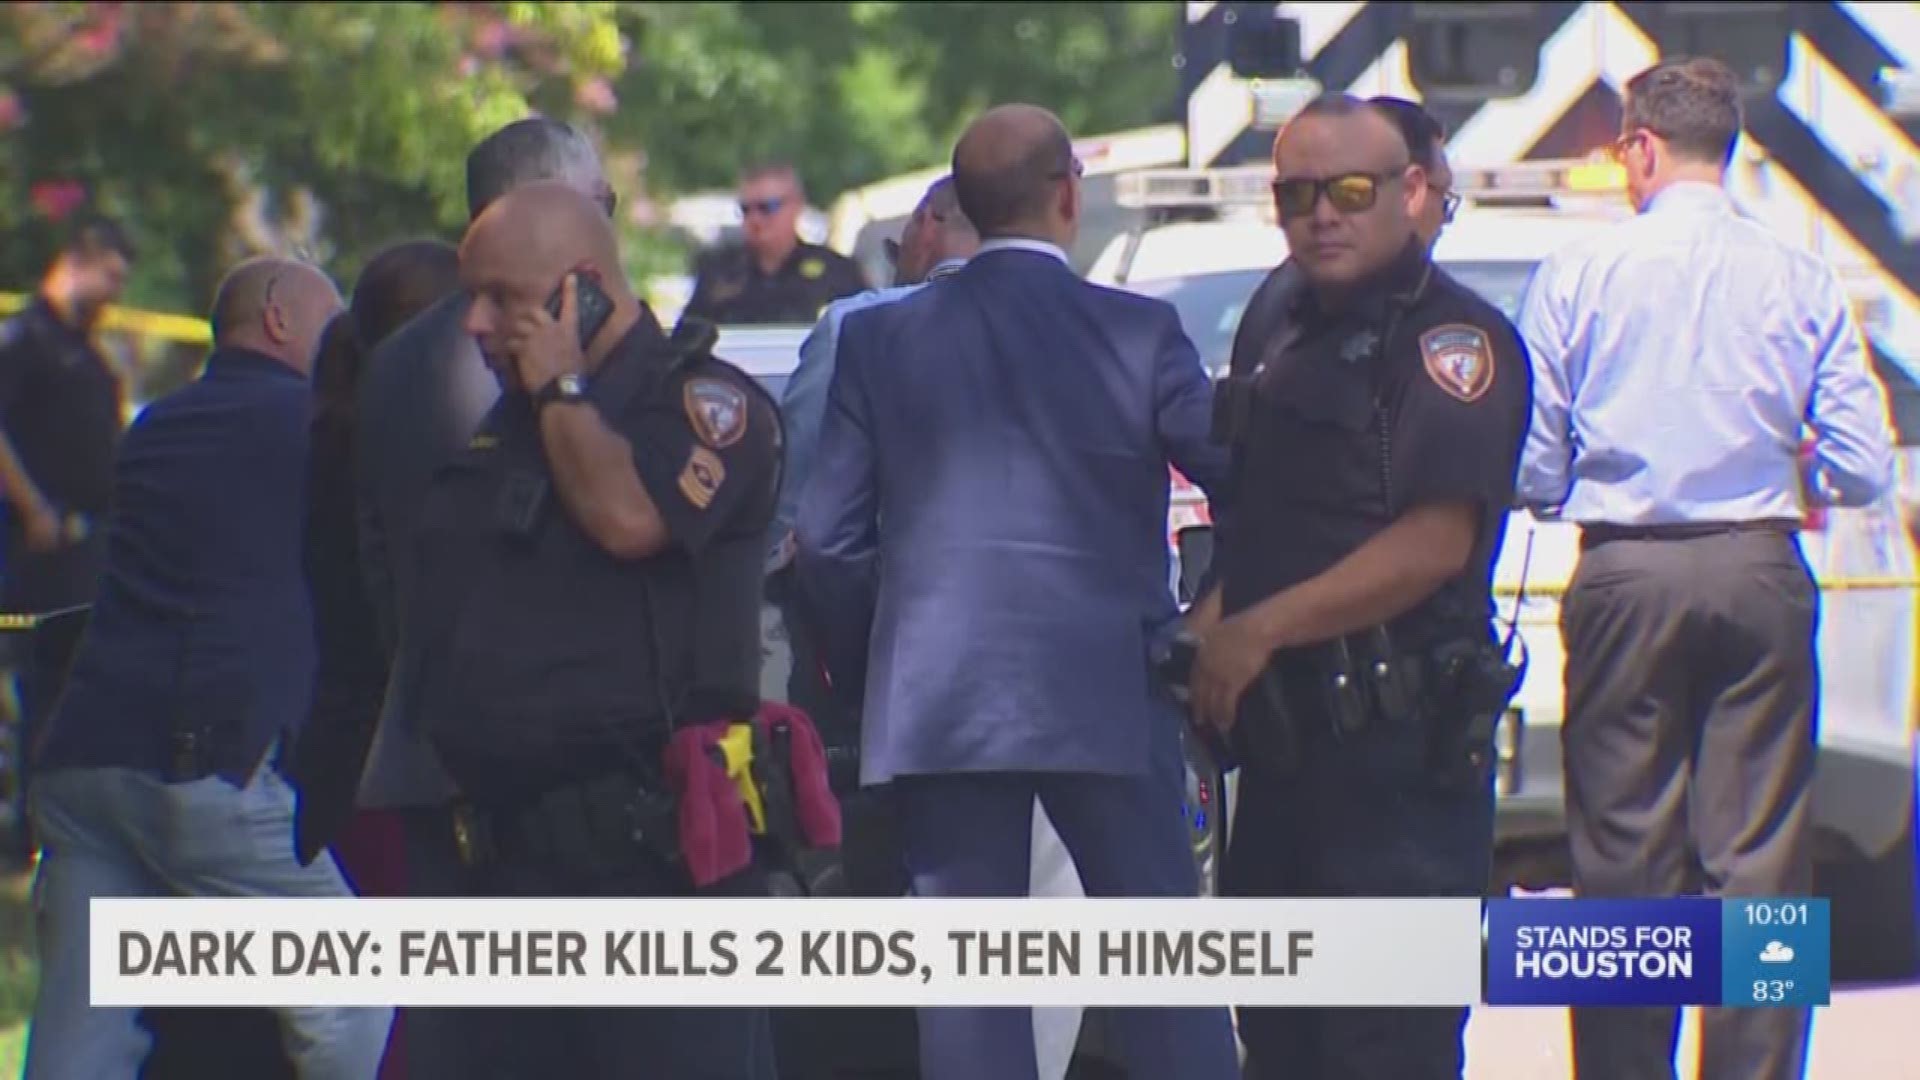 It was a dark day in Harris County after a man kidnapped and killed two children, one of them his own.